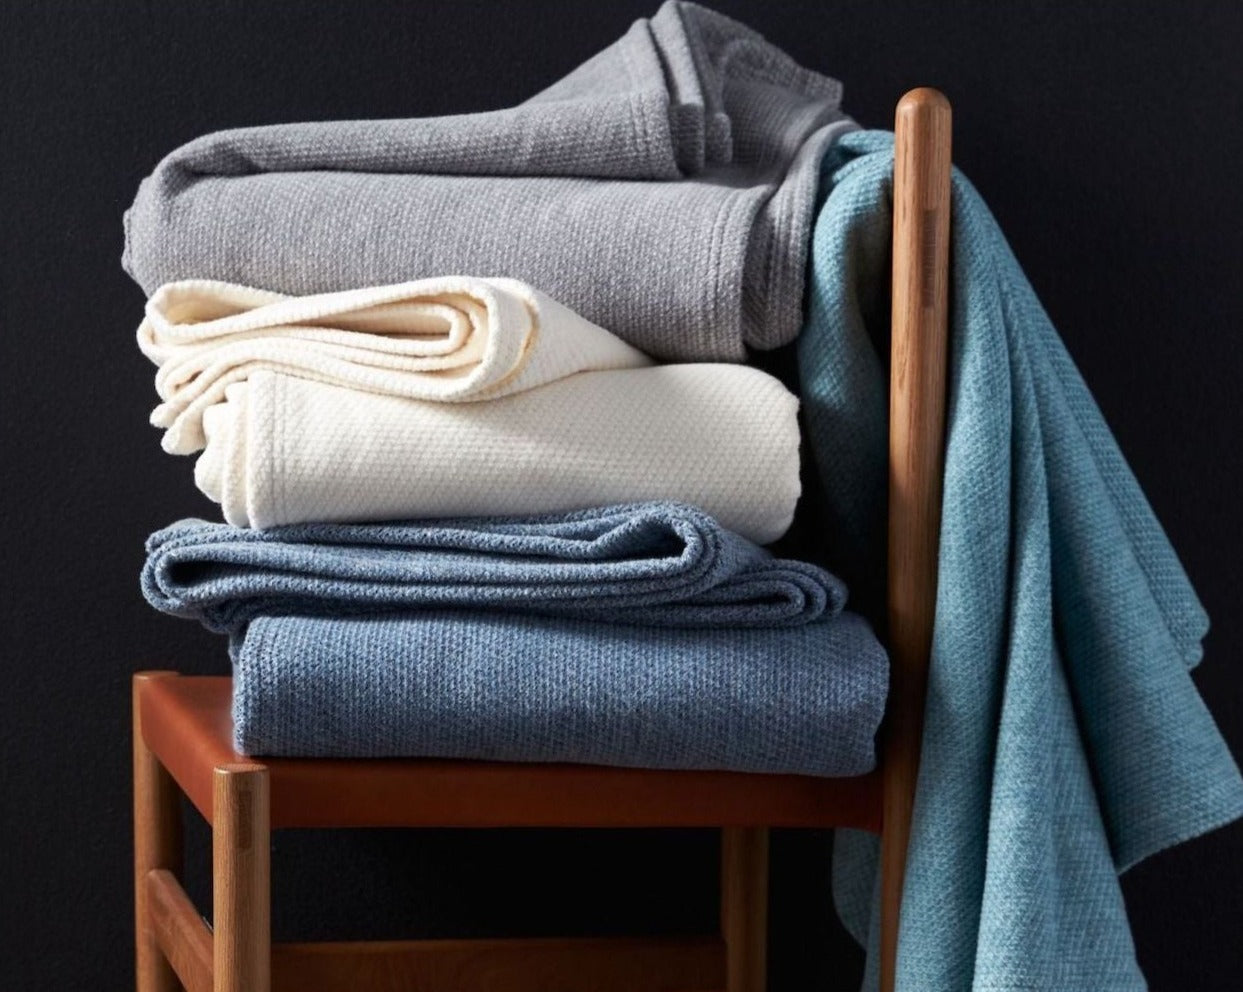 Made from a blend of organic cotton and organic wool, this organic Sequoia blanket offers a soft, cottony feel paired with the warmth of wool.